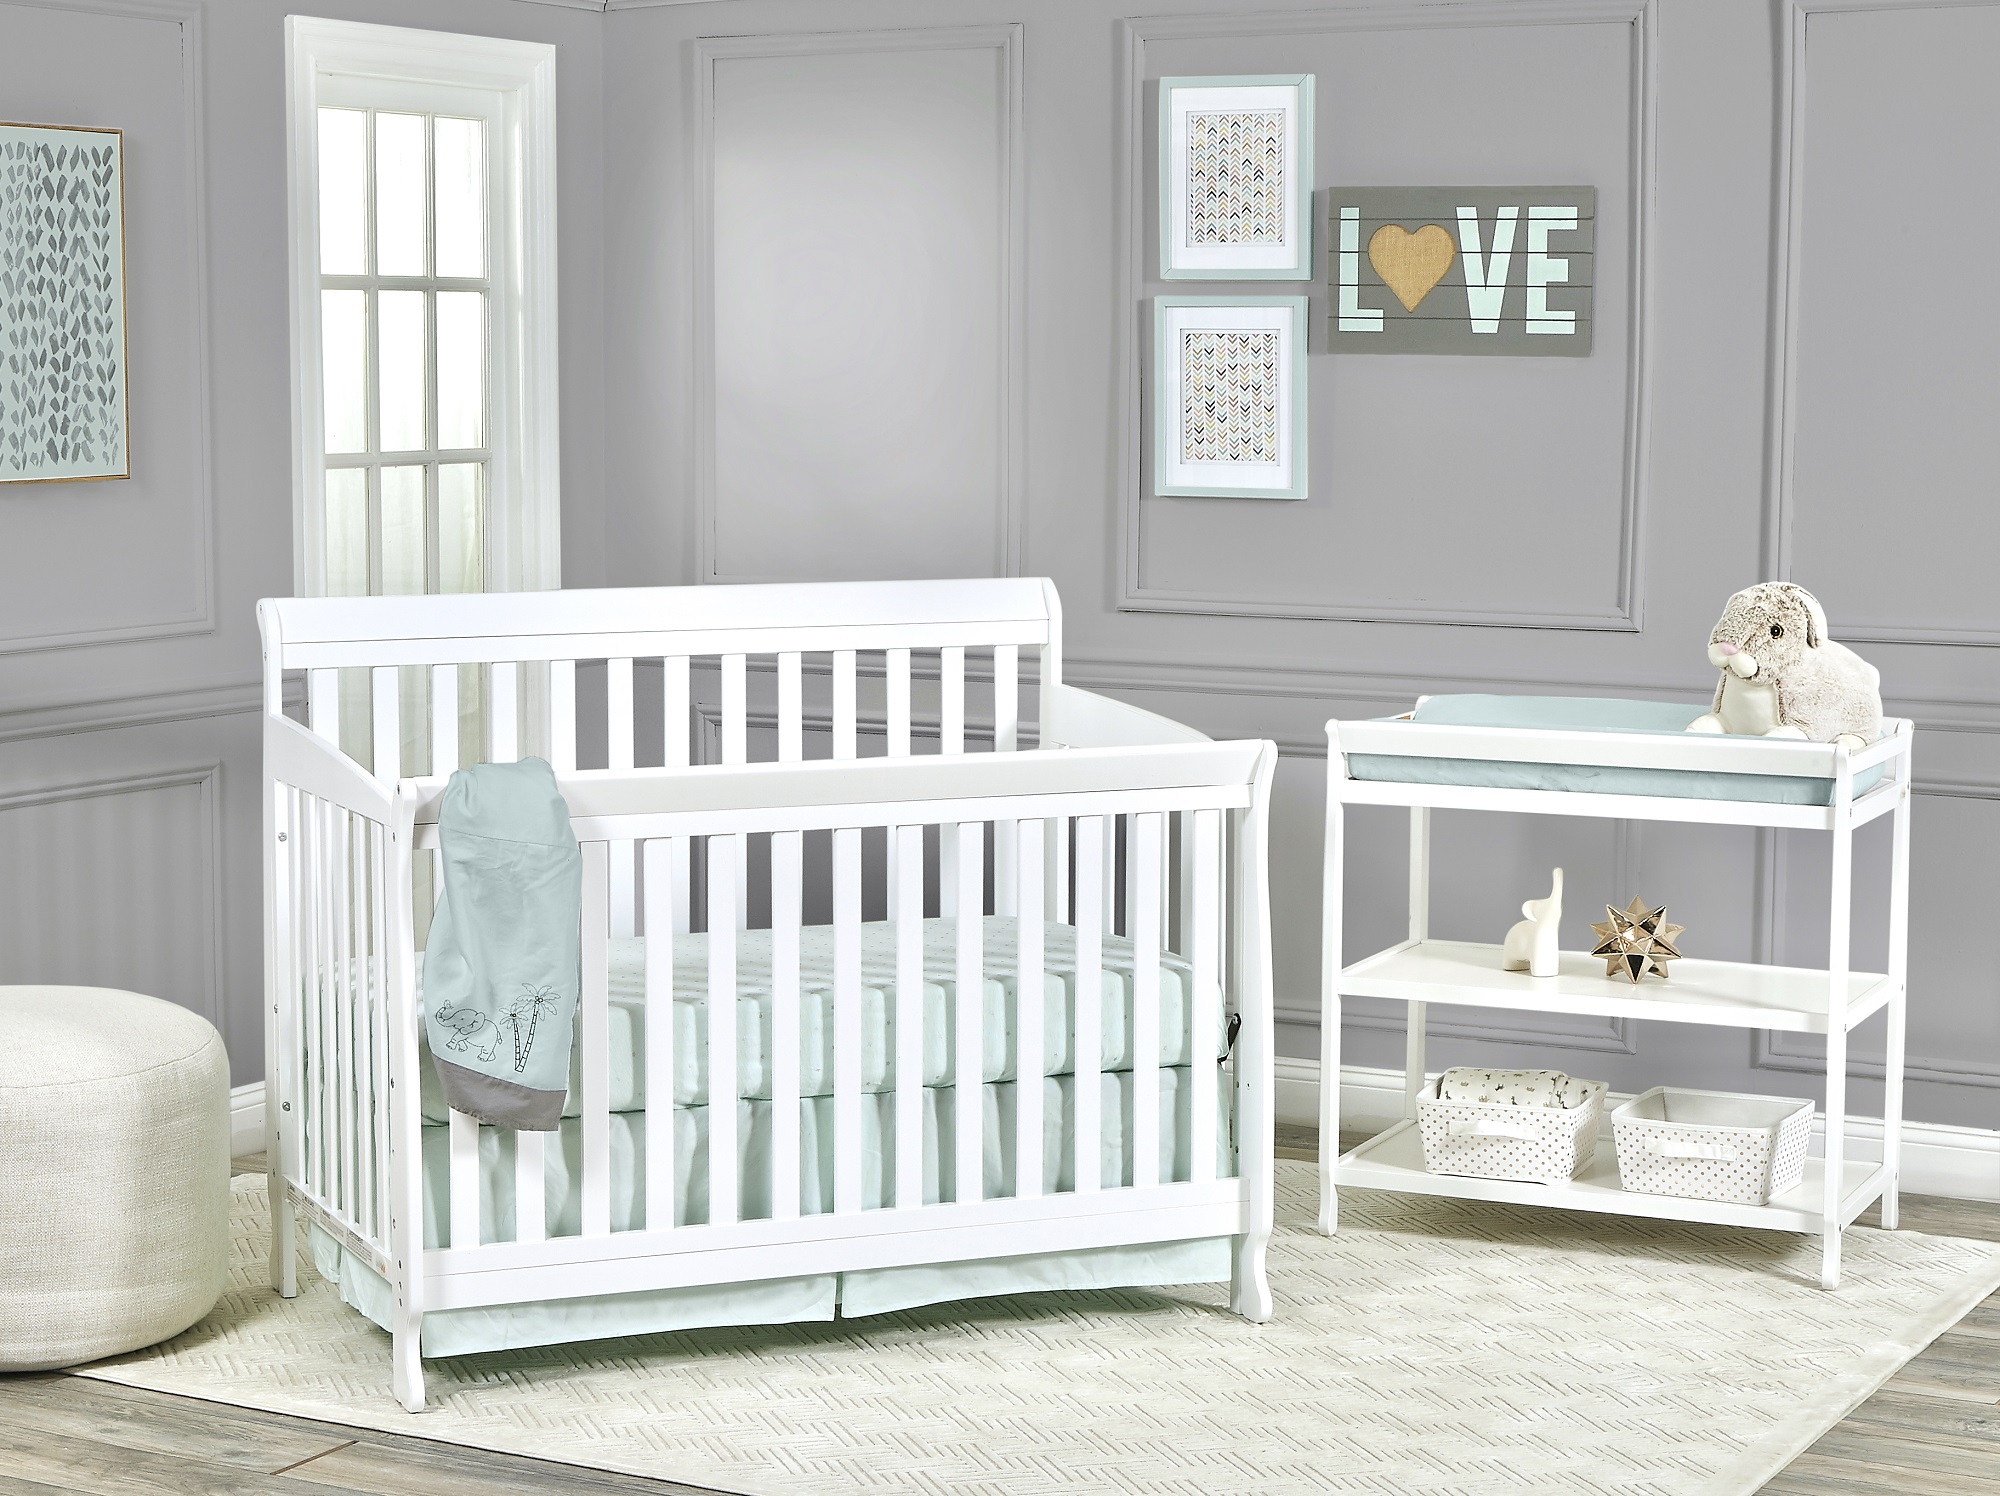 Suite Bebe Riley Crib and Toddler Guard Rail Bundle, White - image 3 of 9